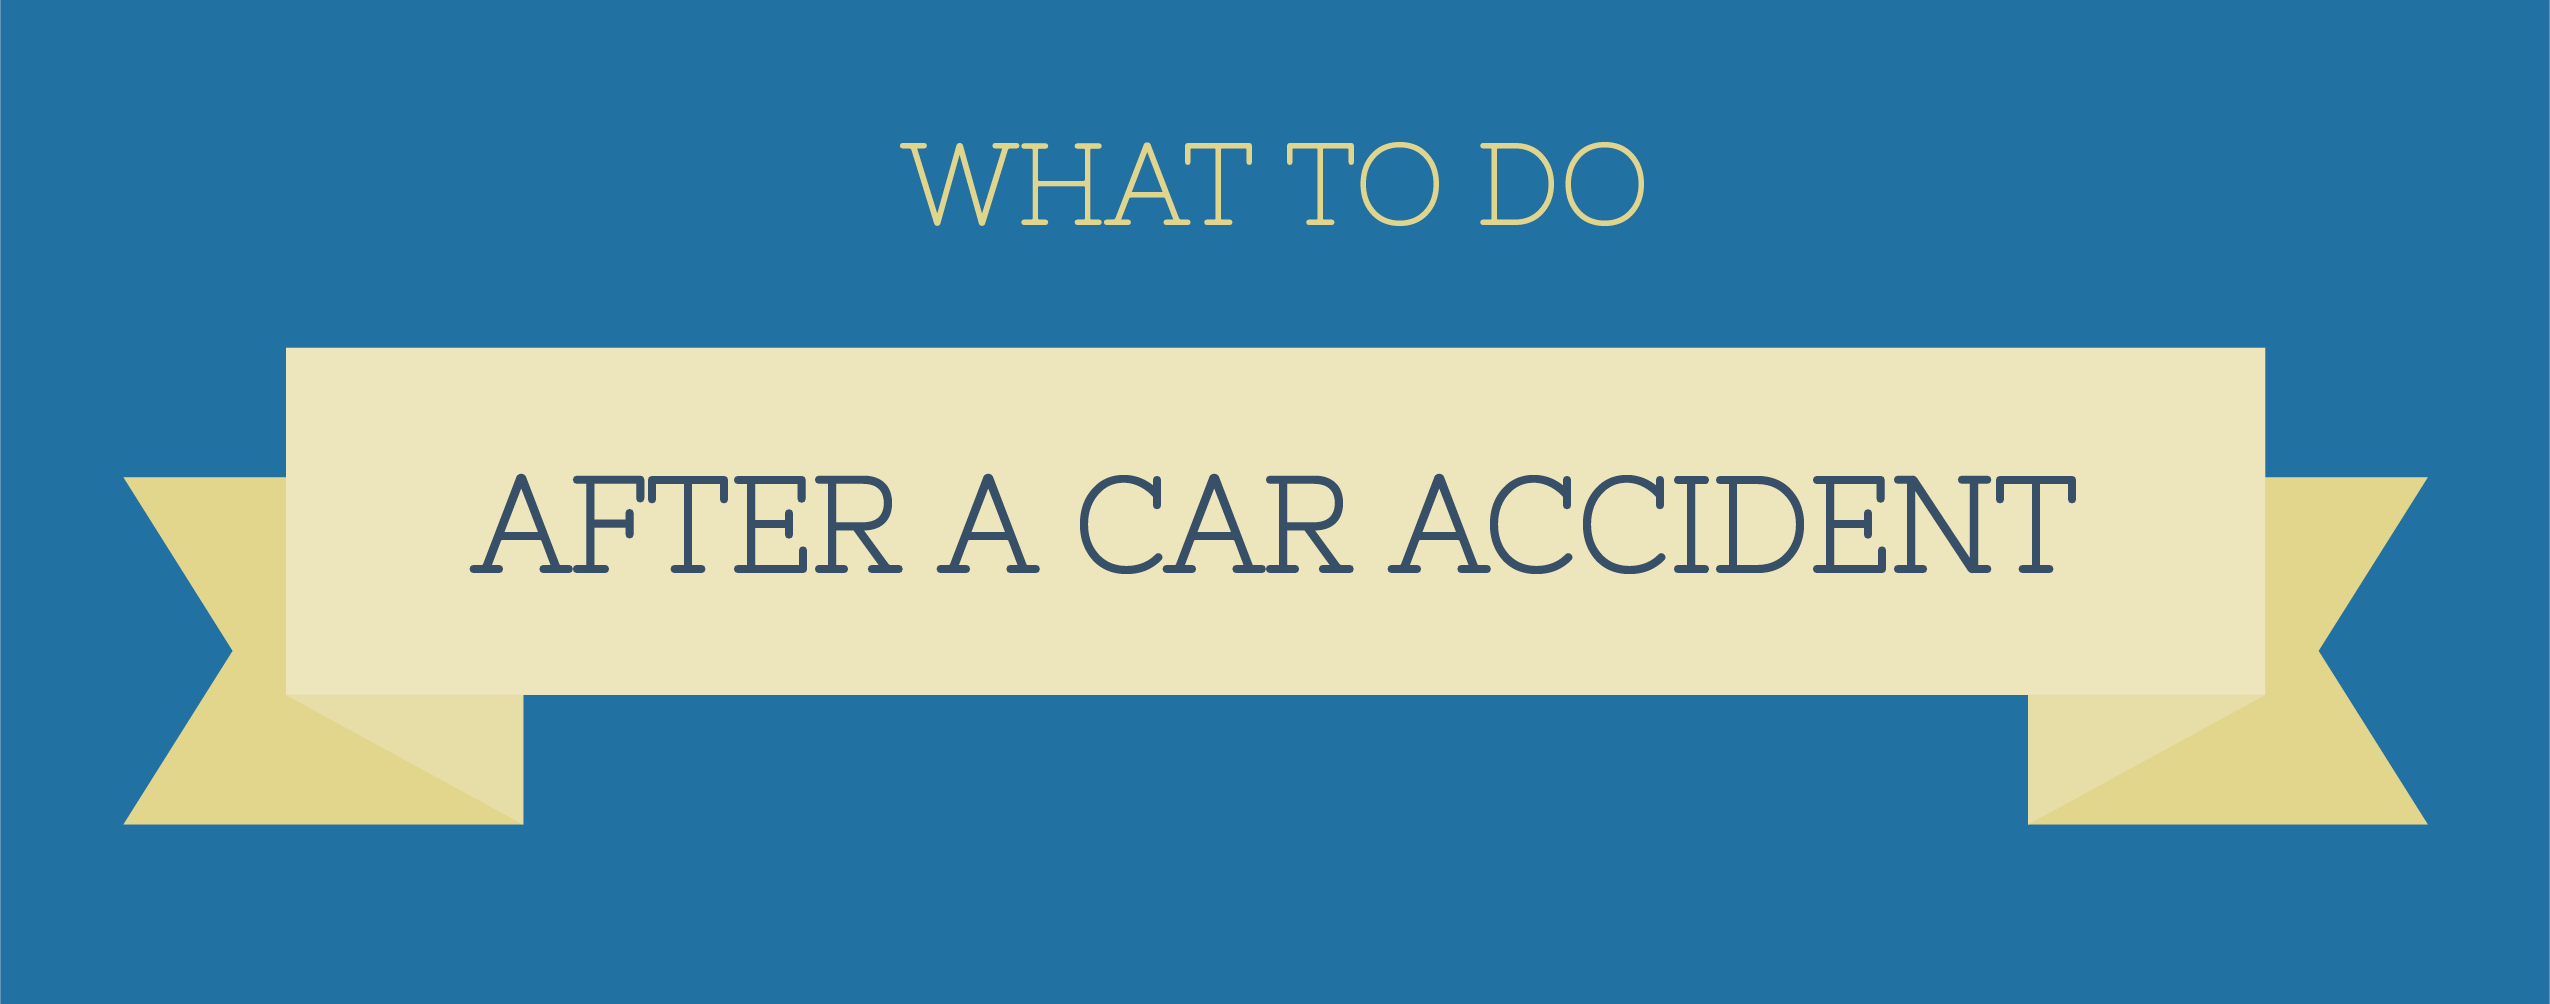 what to do after a car accident infographic header